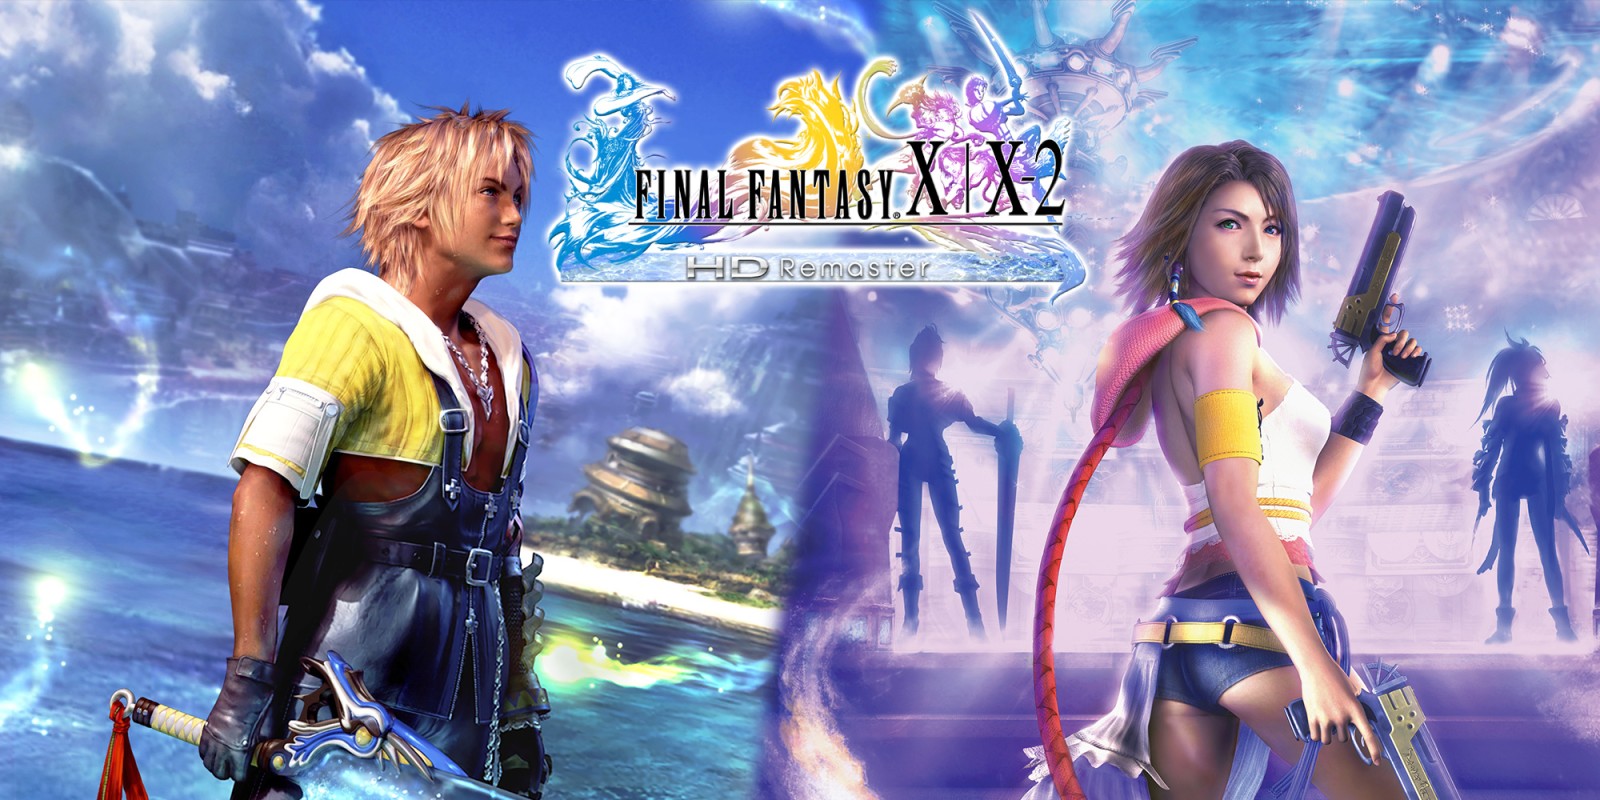 Playing Final Fantasy X for the first time in 2019 is fascinating